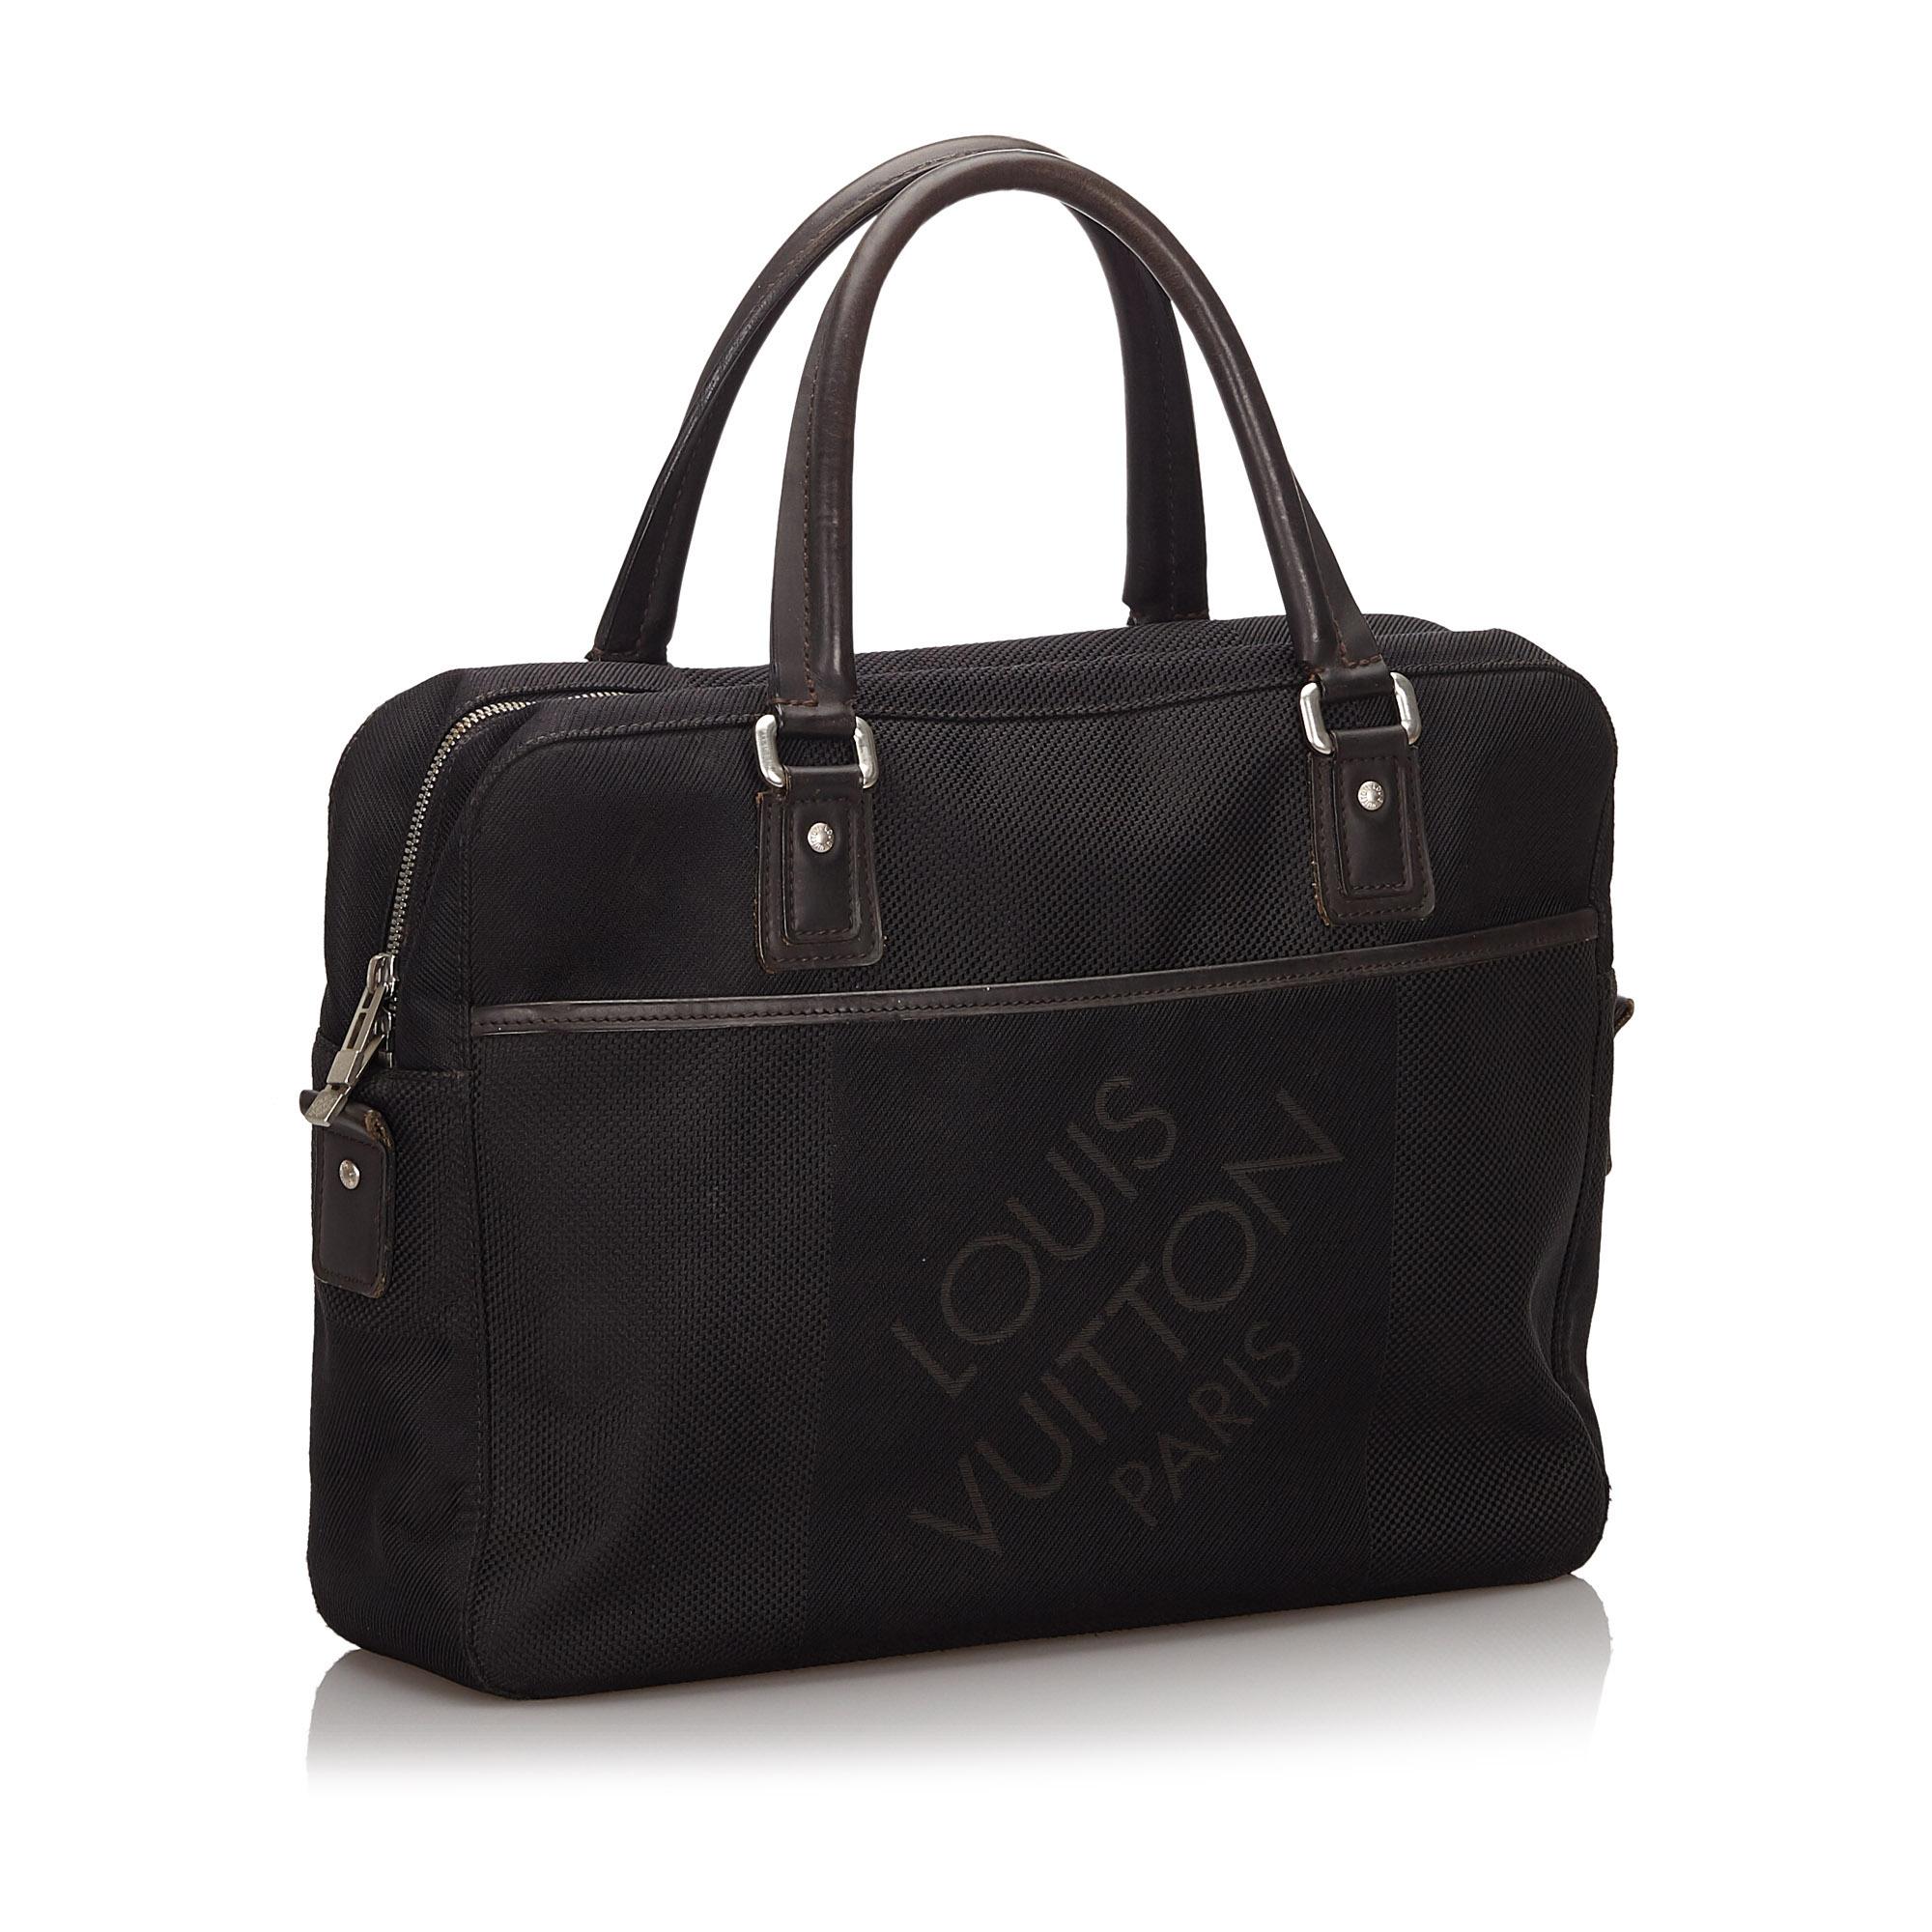 The Yack features a damier geant canvas body with leather trim, rolled handles, a 2 way top zip closure, an exterior slip pocket and an interior slip pocket. It carries as B+ condition rating.

Inclusions: 
This item does not come with